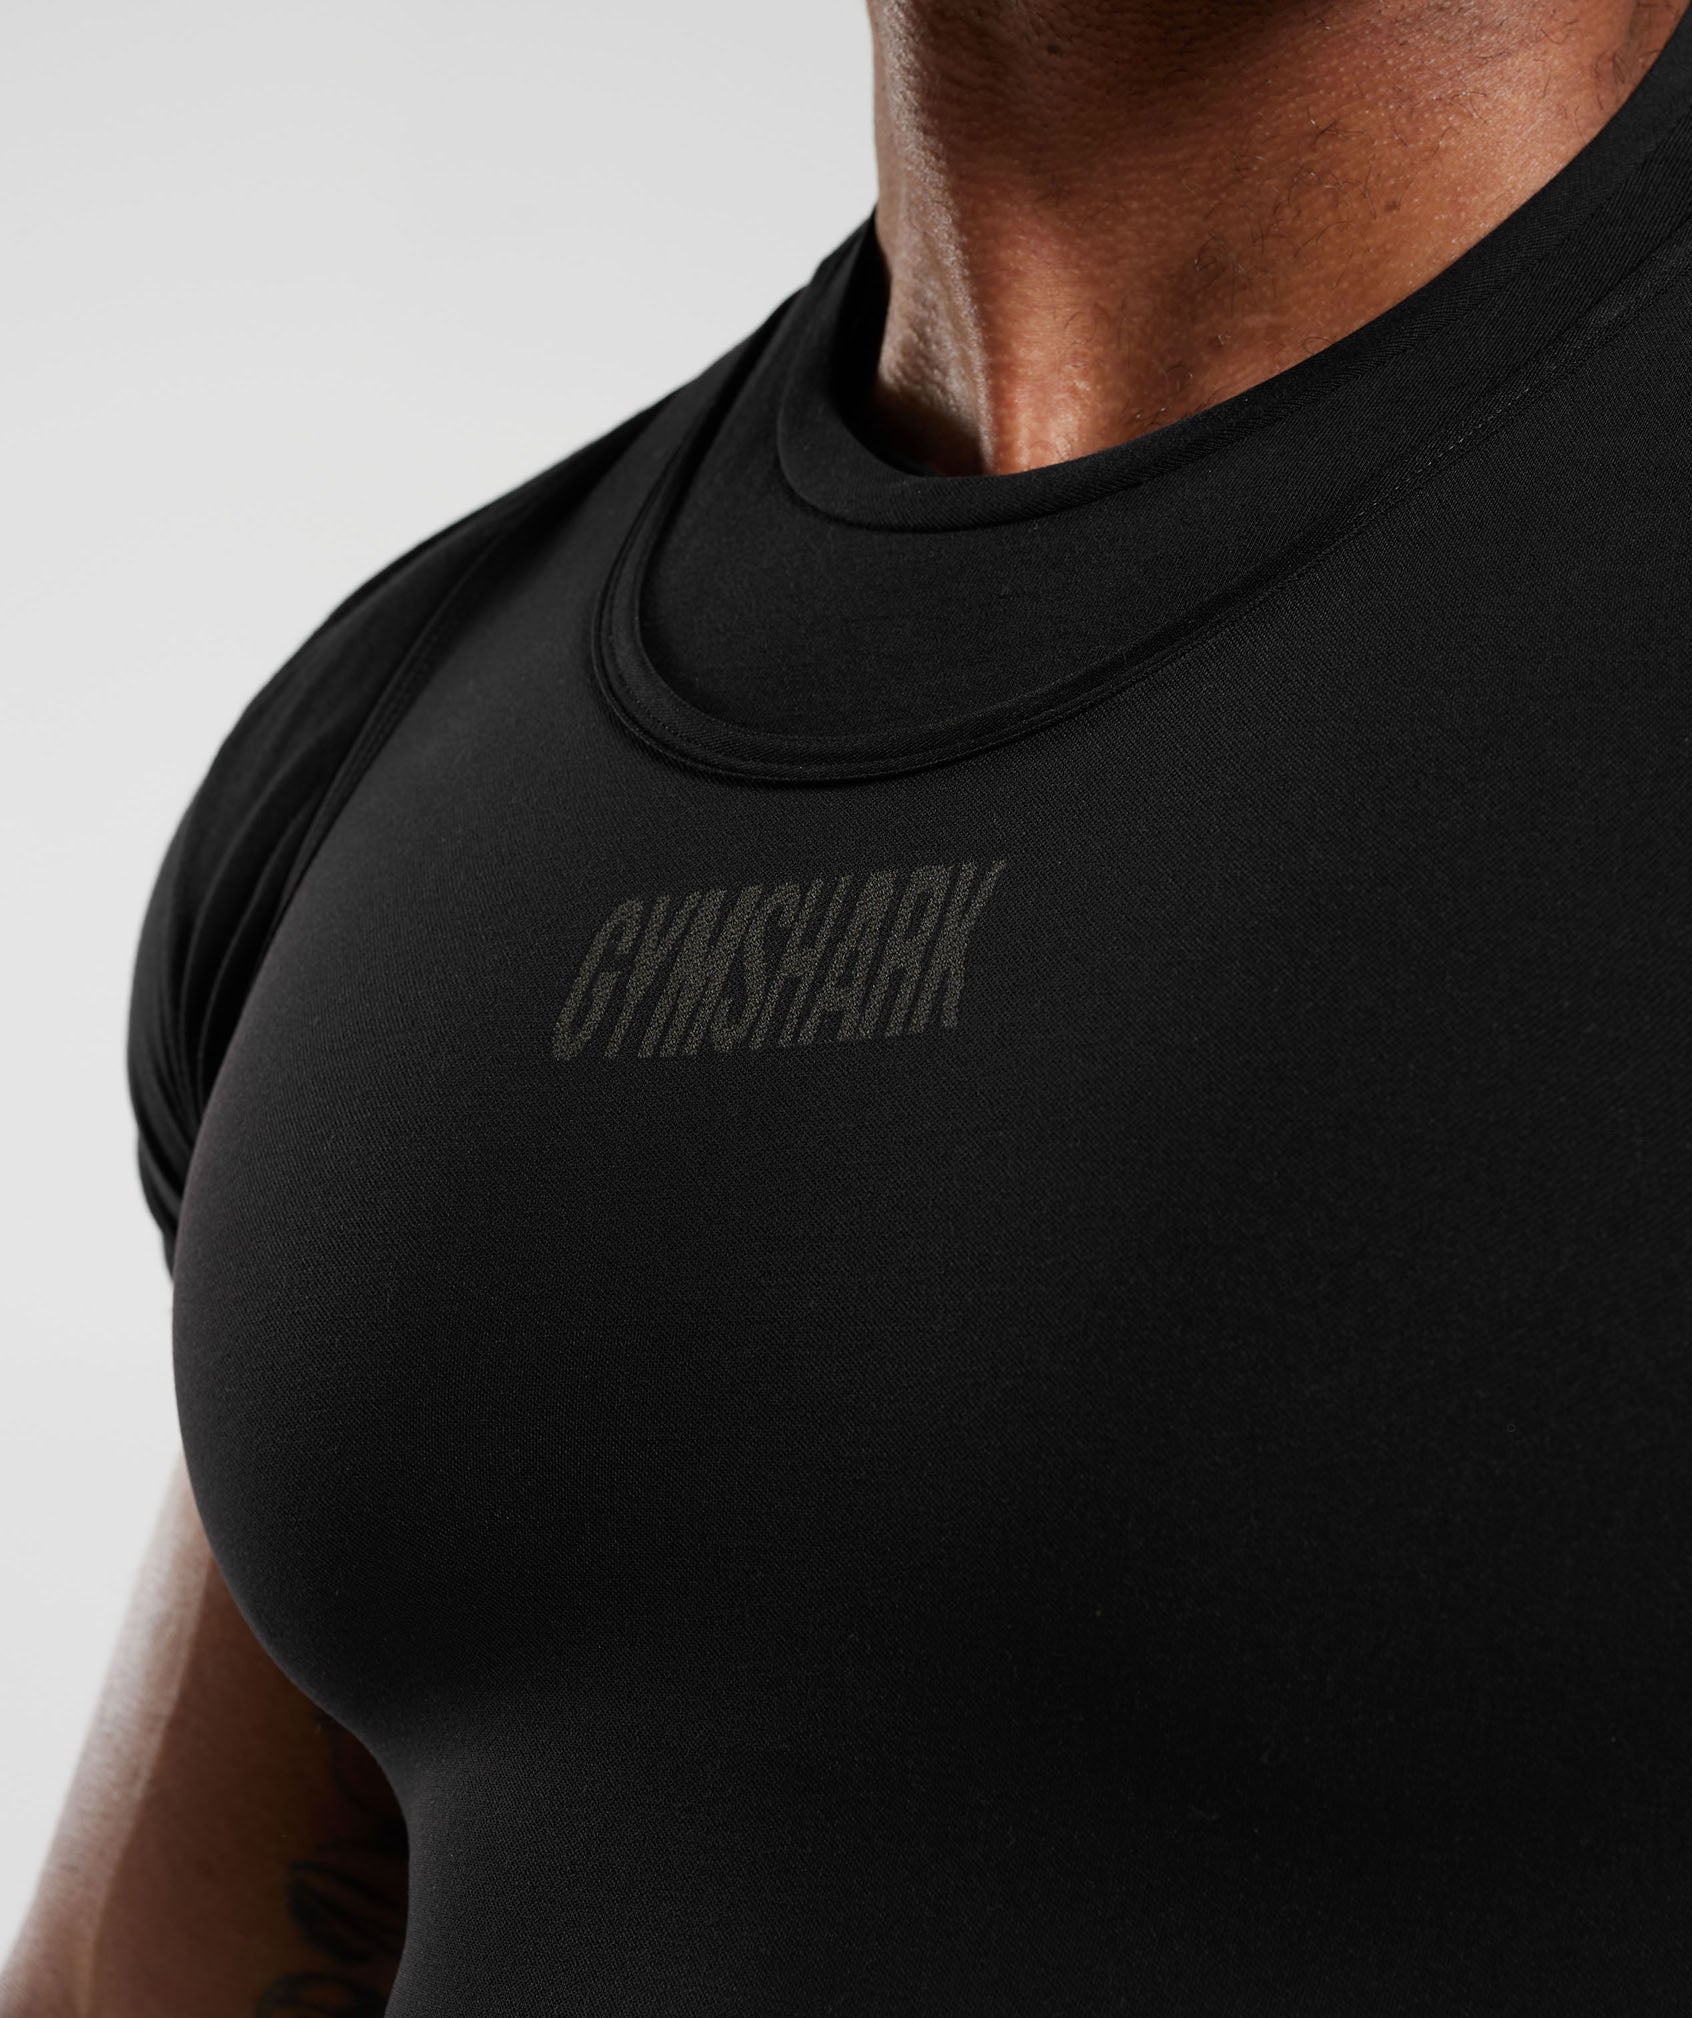 Seamless Singlet in Black/Charcoal Grey - view 6